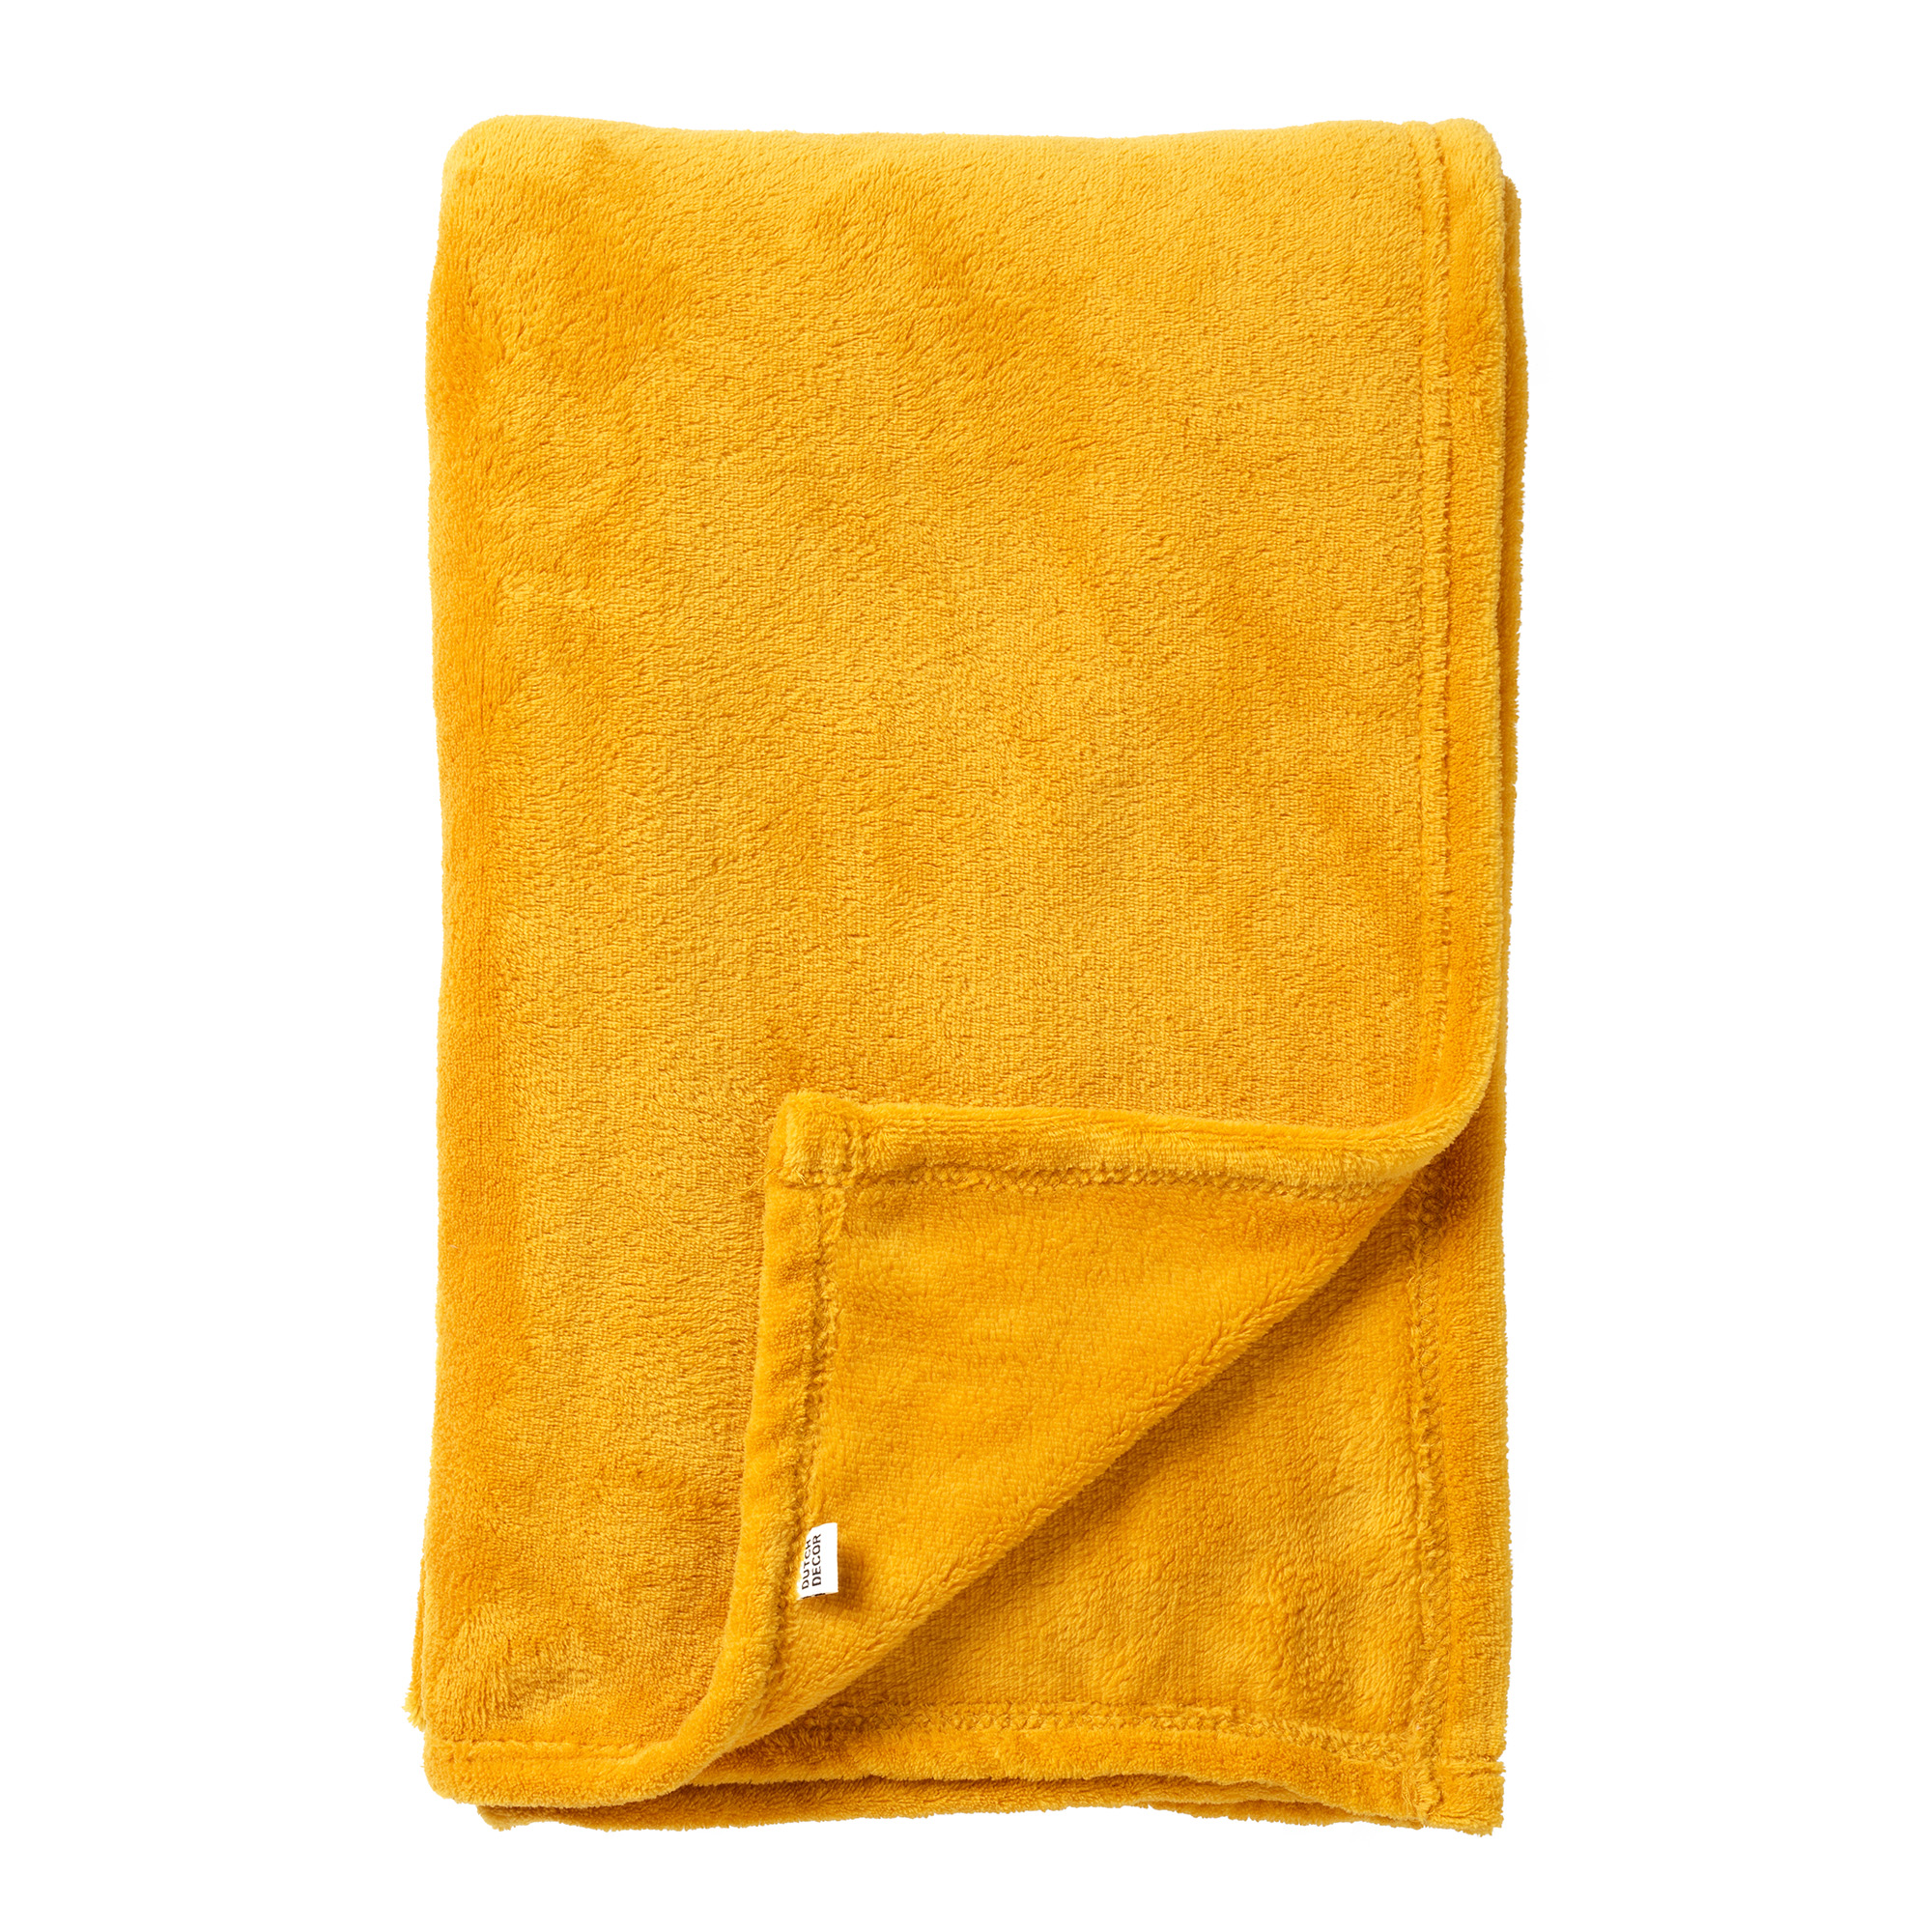 SIDNEY - Plaid 140x180 cm - Fleece blanket made of 100% recycled polyester - super soft - Eco Line collection - Golden Glow - yellow